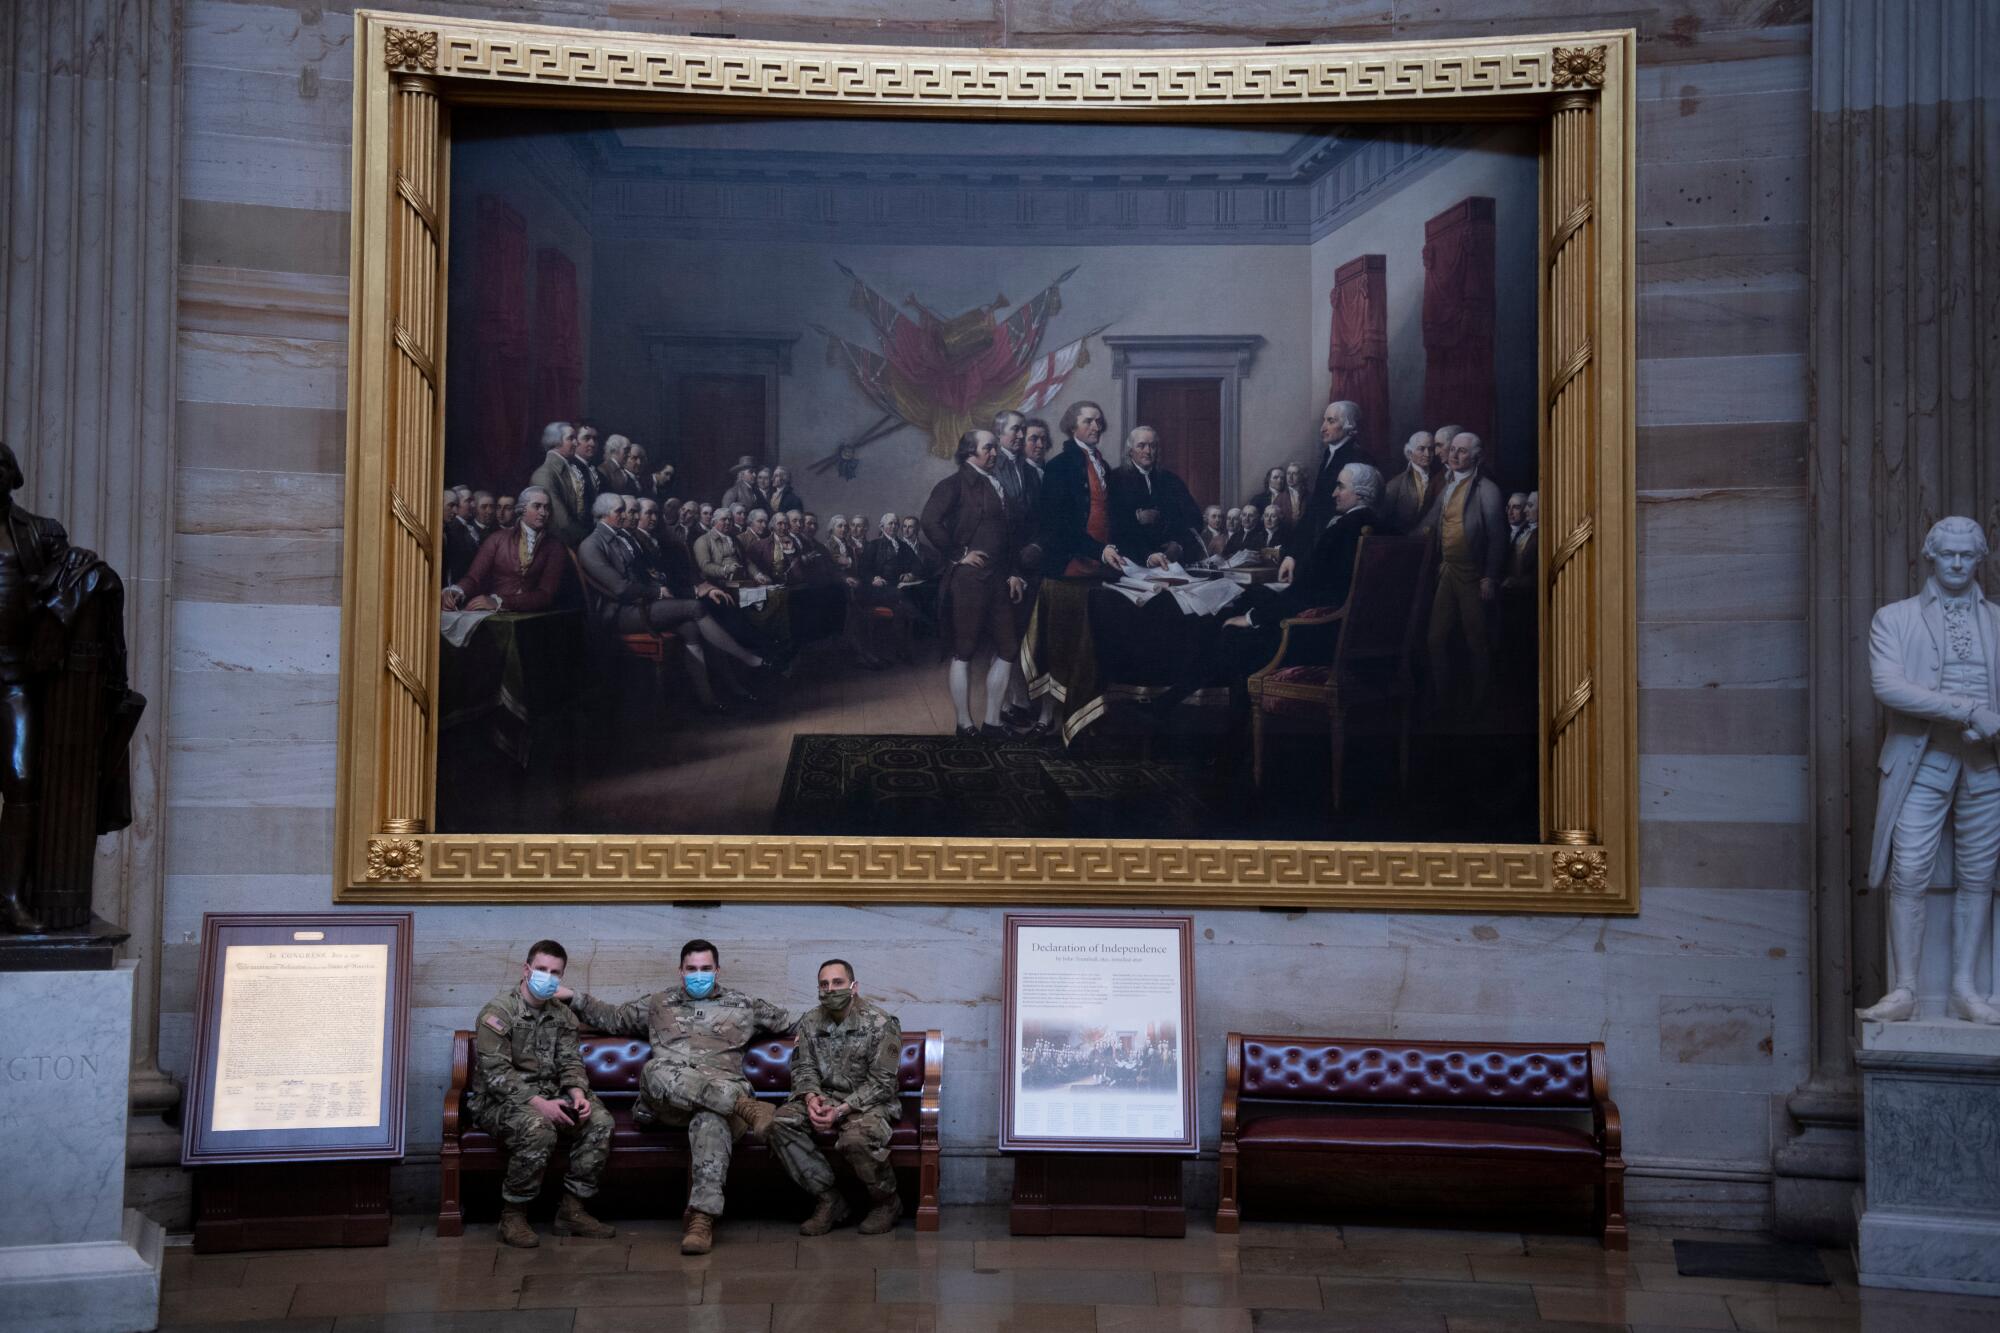 Three men in camo fatigues sit on a bench under a massive painting in the Capitol